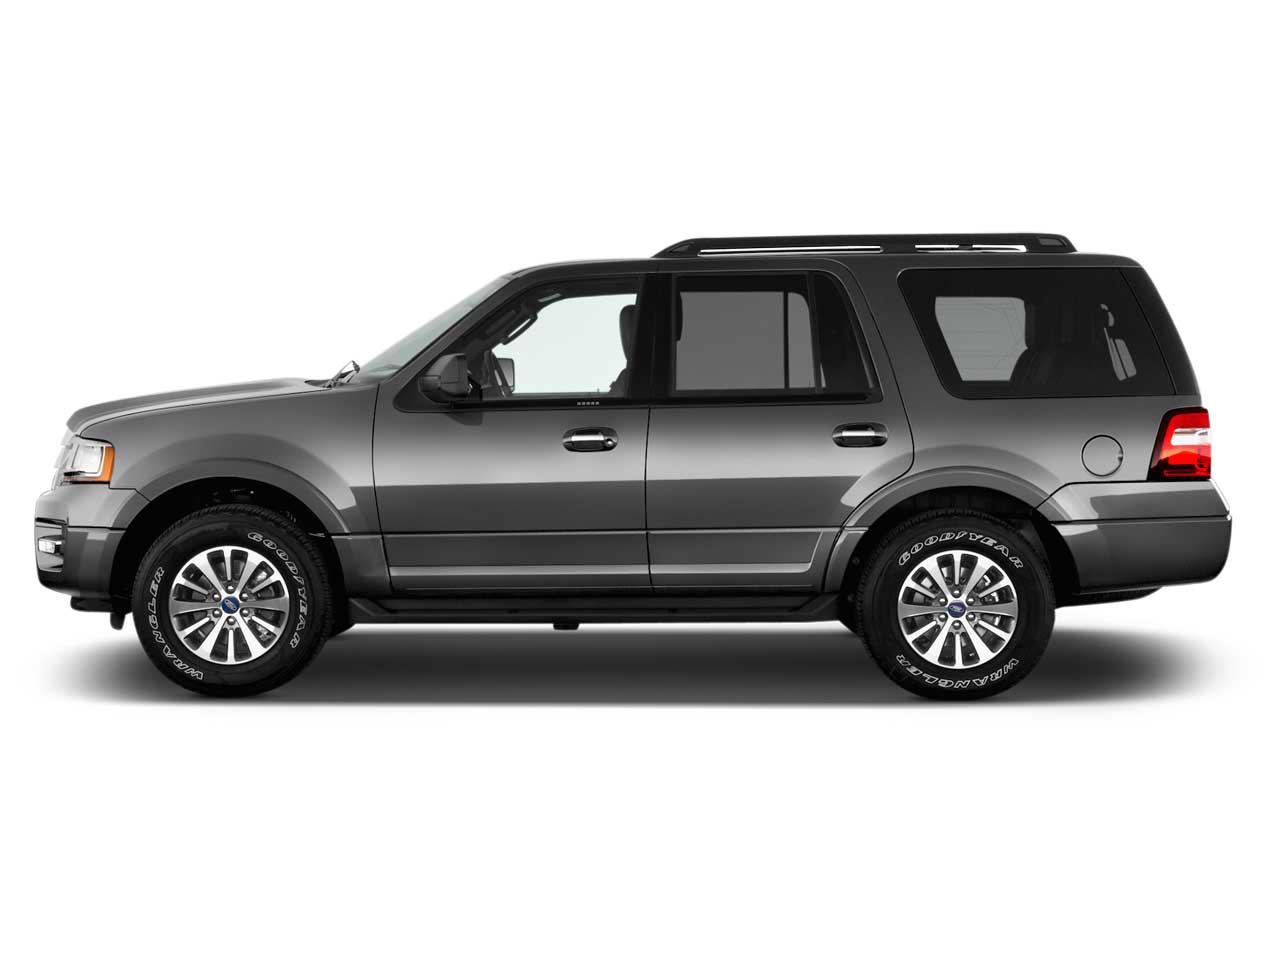 Ford Expedition XLT Exterior side view